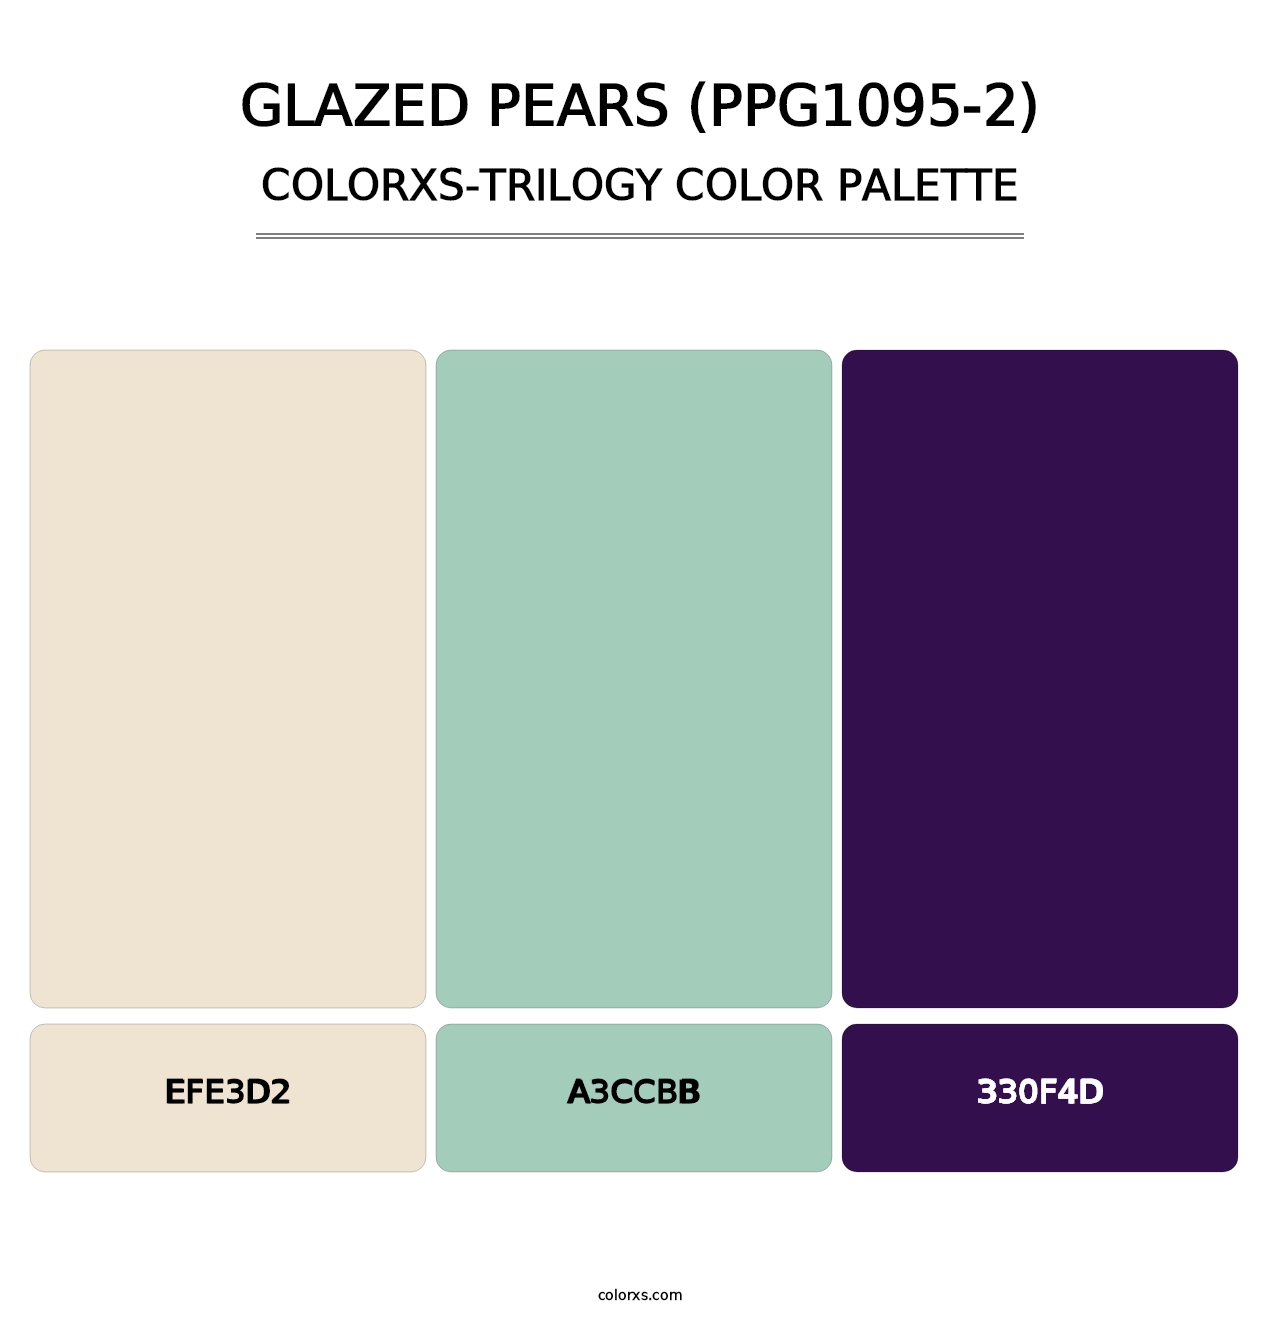 Glazed Pears (PPG1095-2) - Colorxs Trilogy Palette